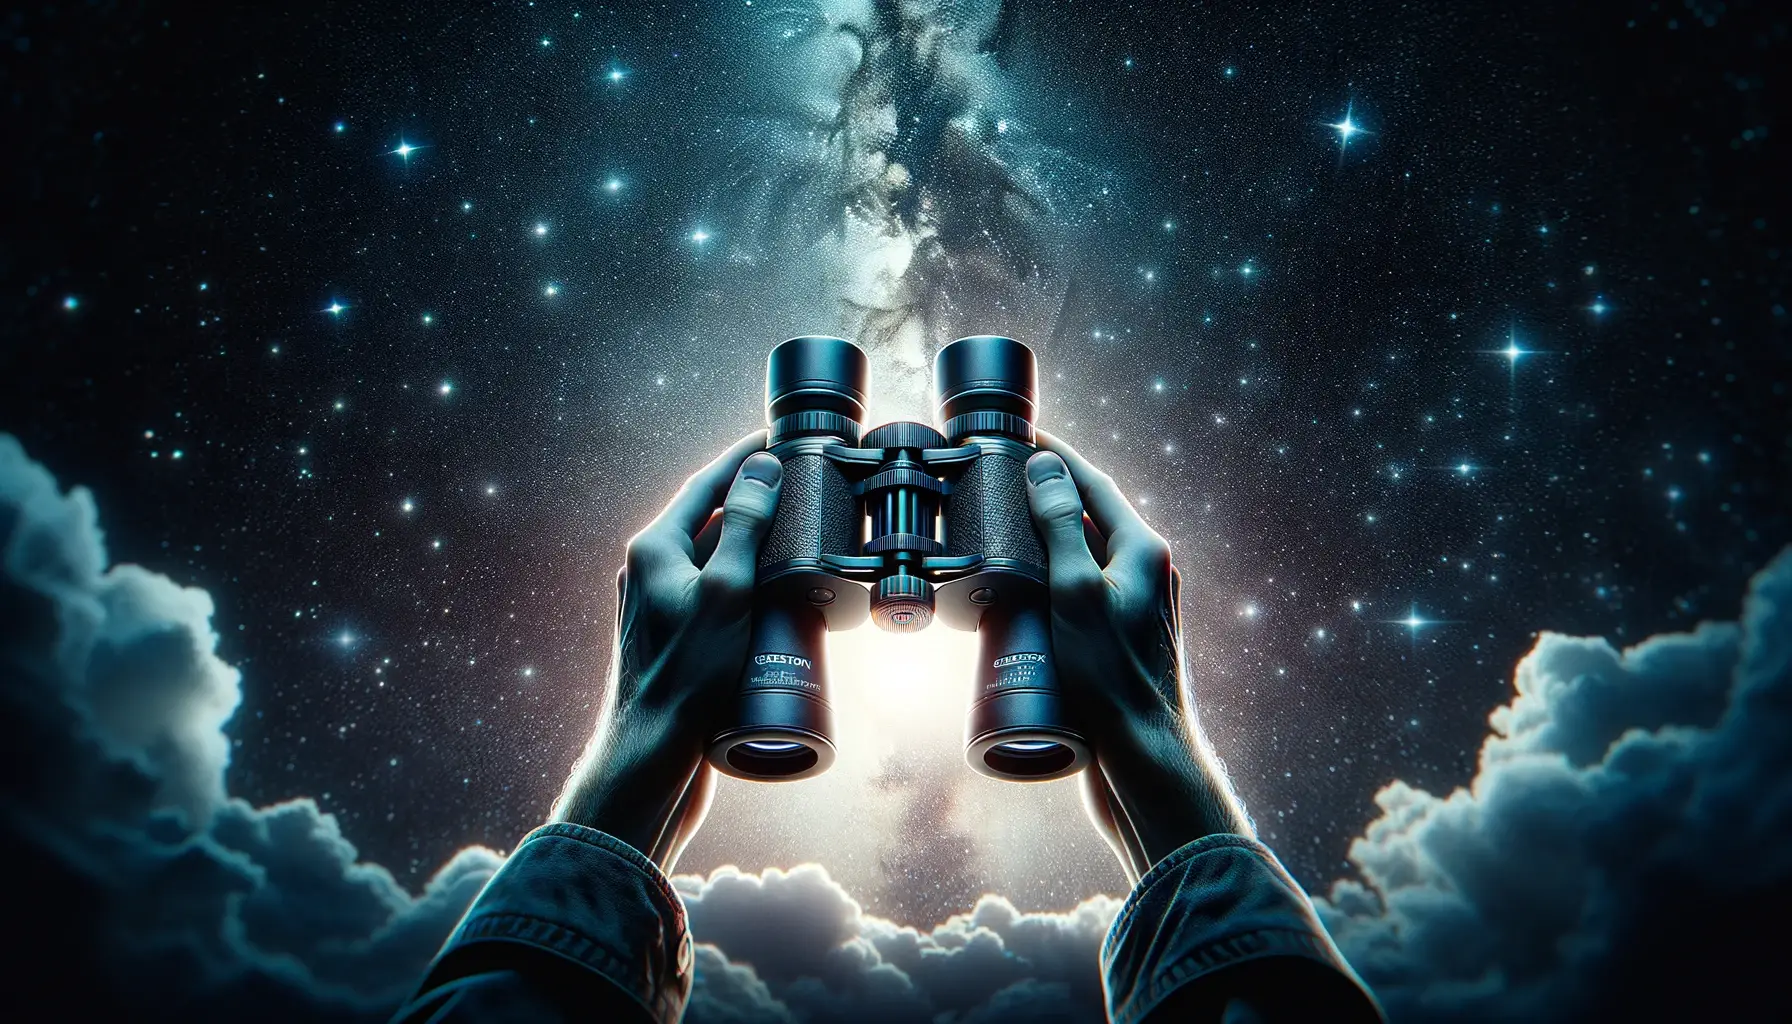 Featured image for our hands-on review of the Celestron Skymaster 15x70 binoculars